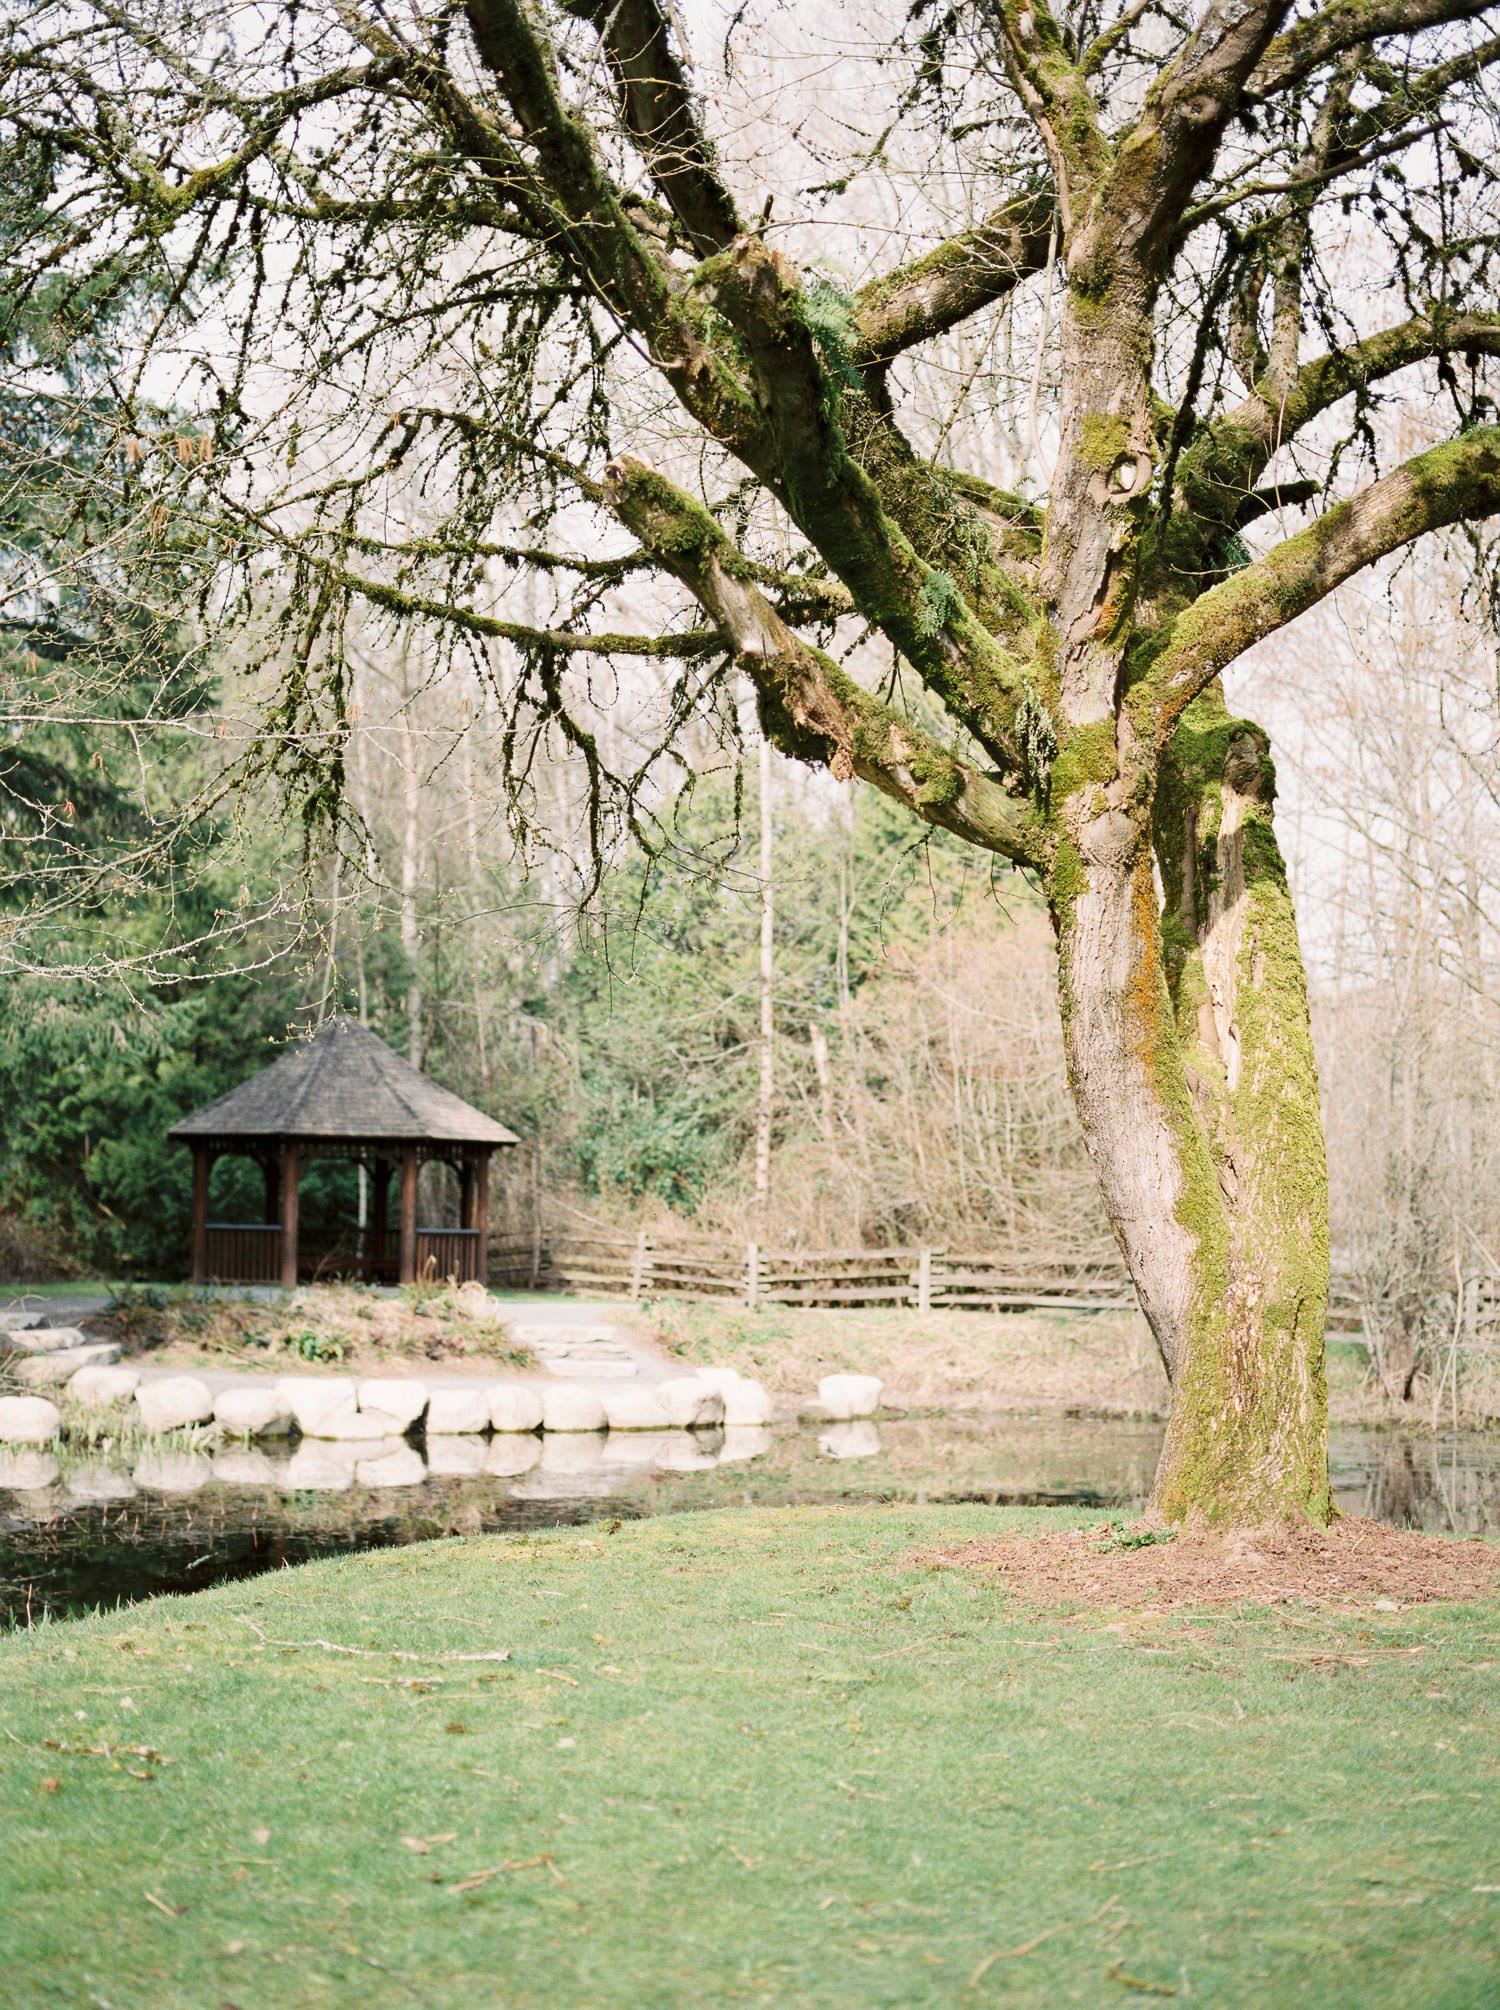 Gazebo and pond at Campbell Valley Park